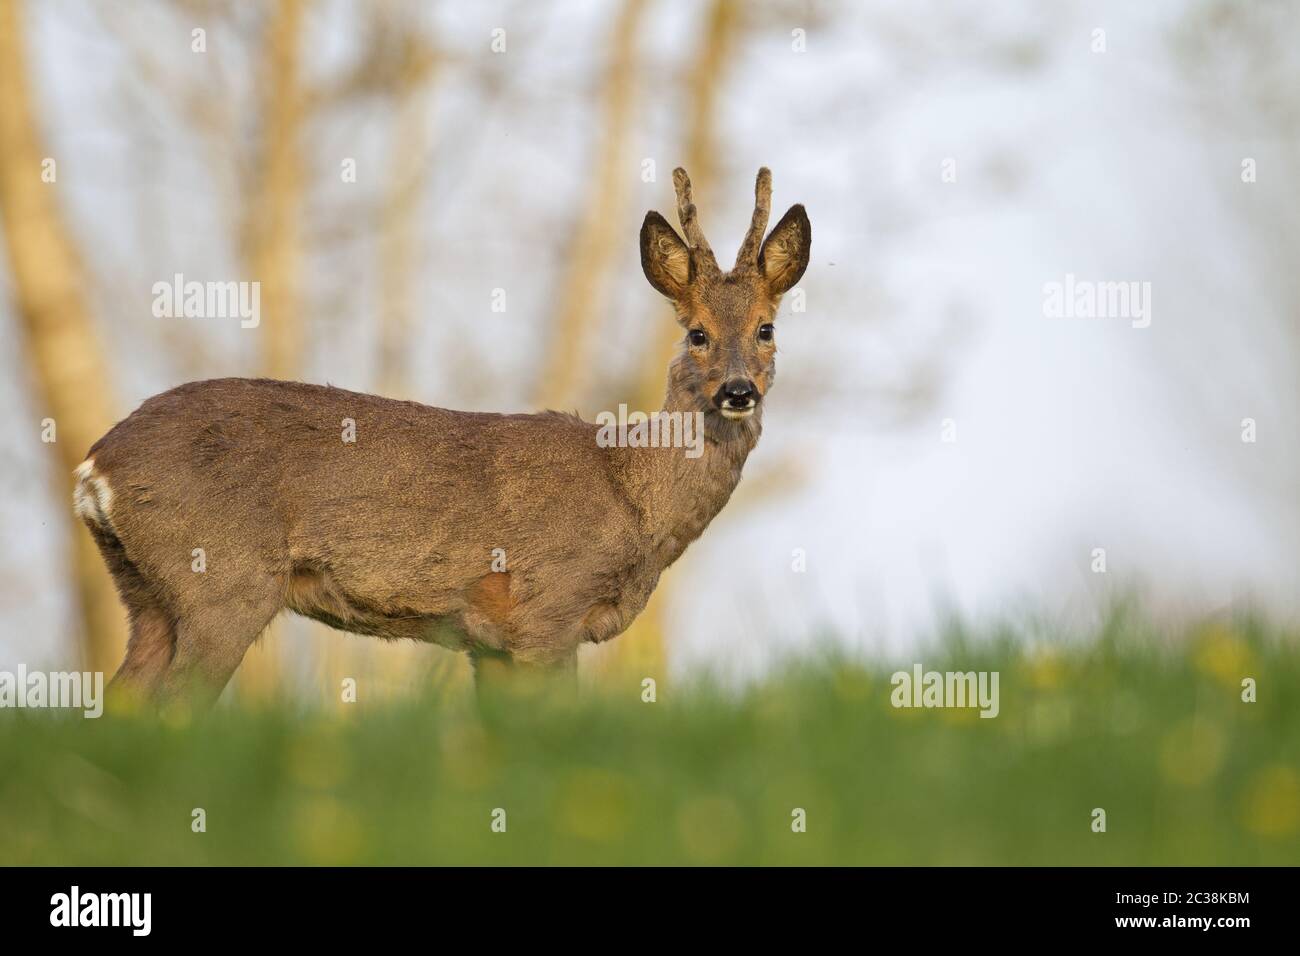 Roe Deer yearling stands intently looking on a meadow with Dandelion Stock Photo